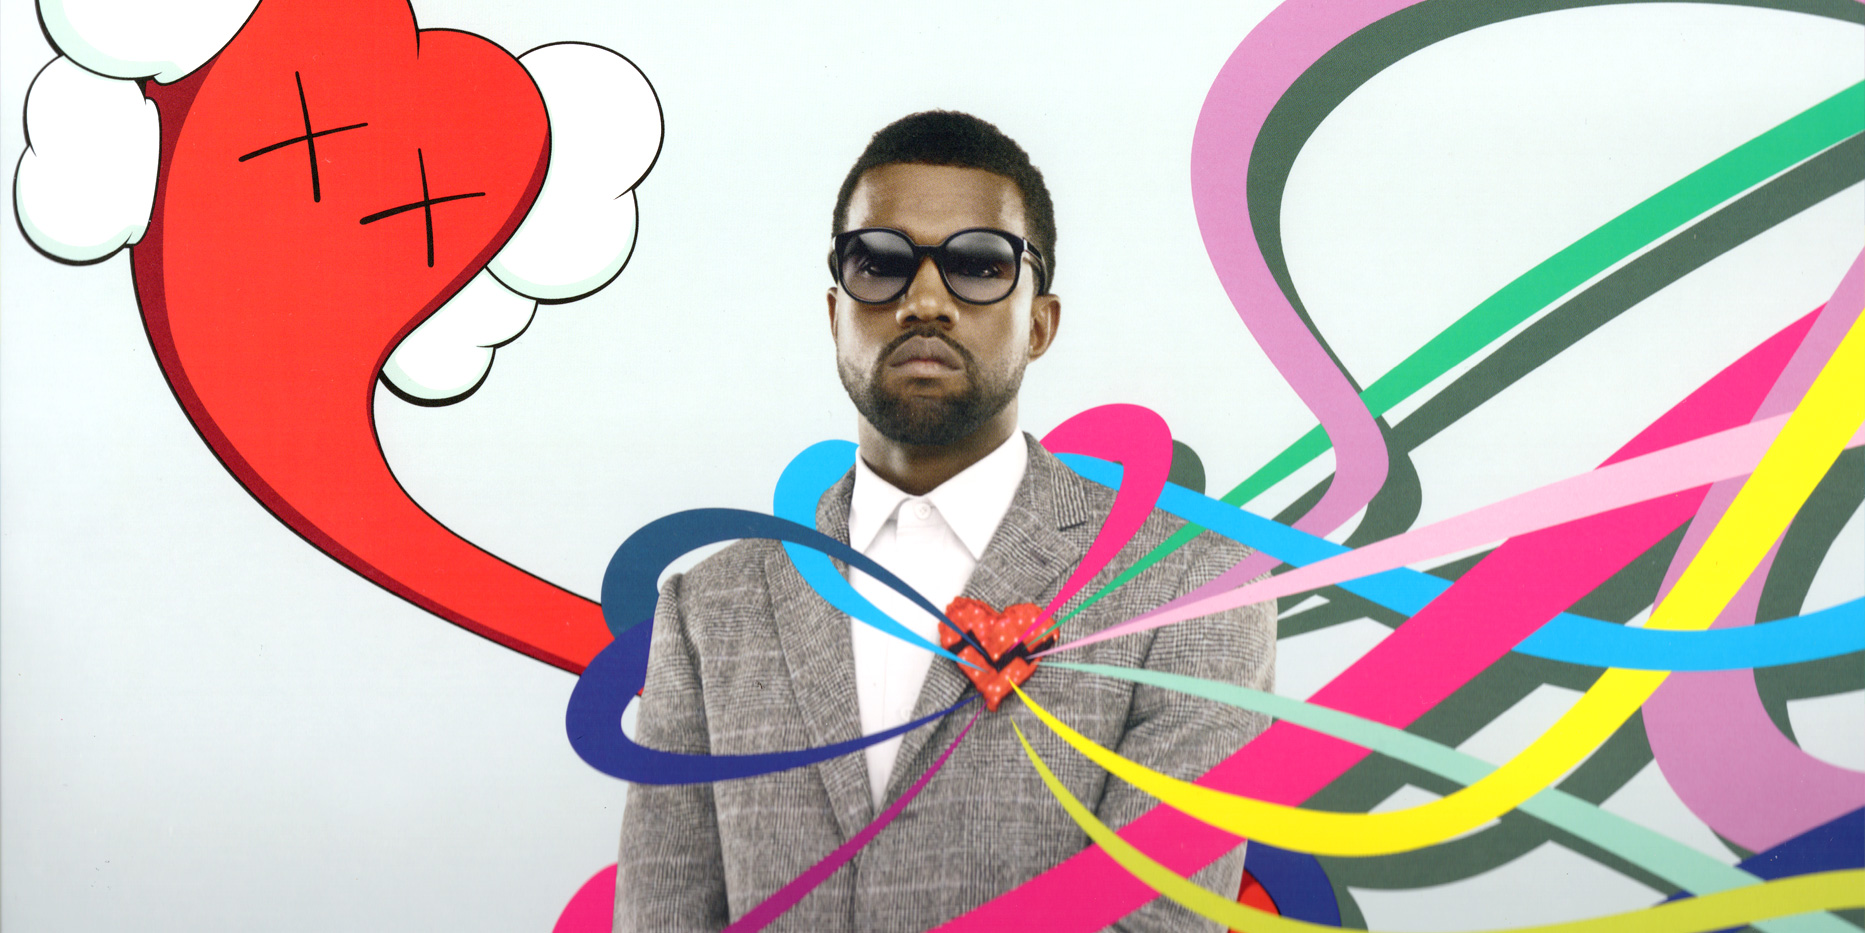 album or cover kanye west 808s and heartbreak